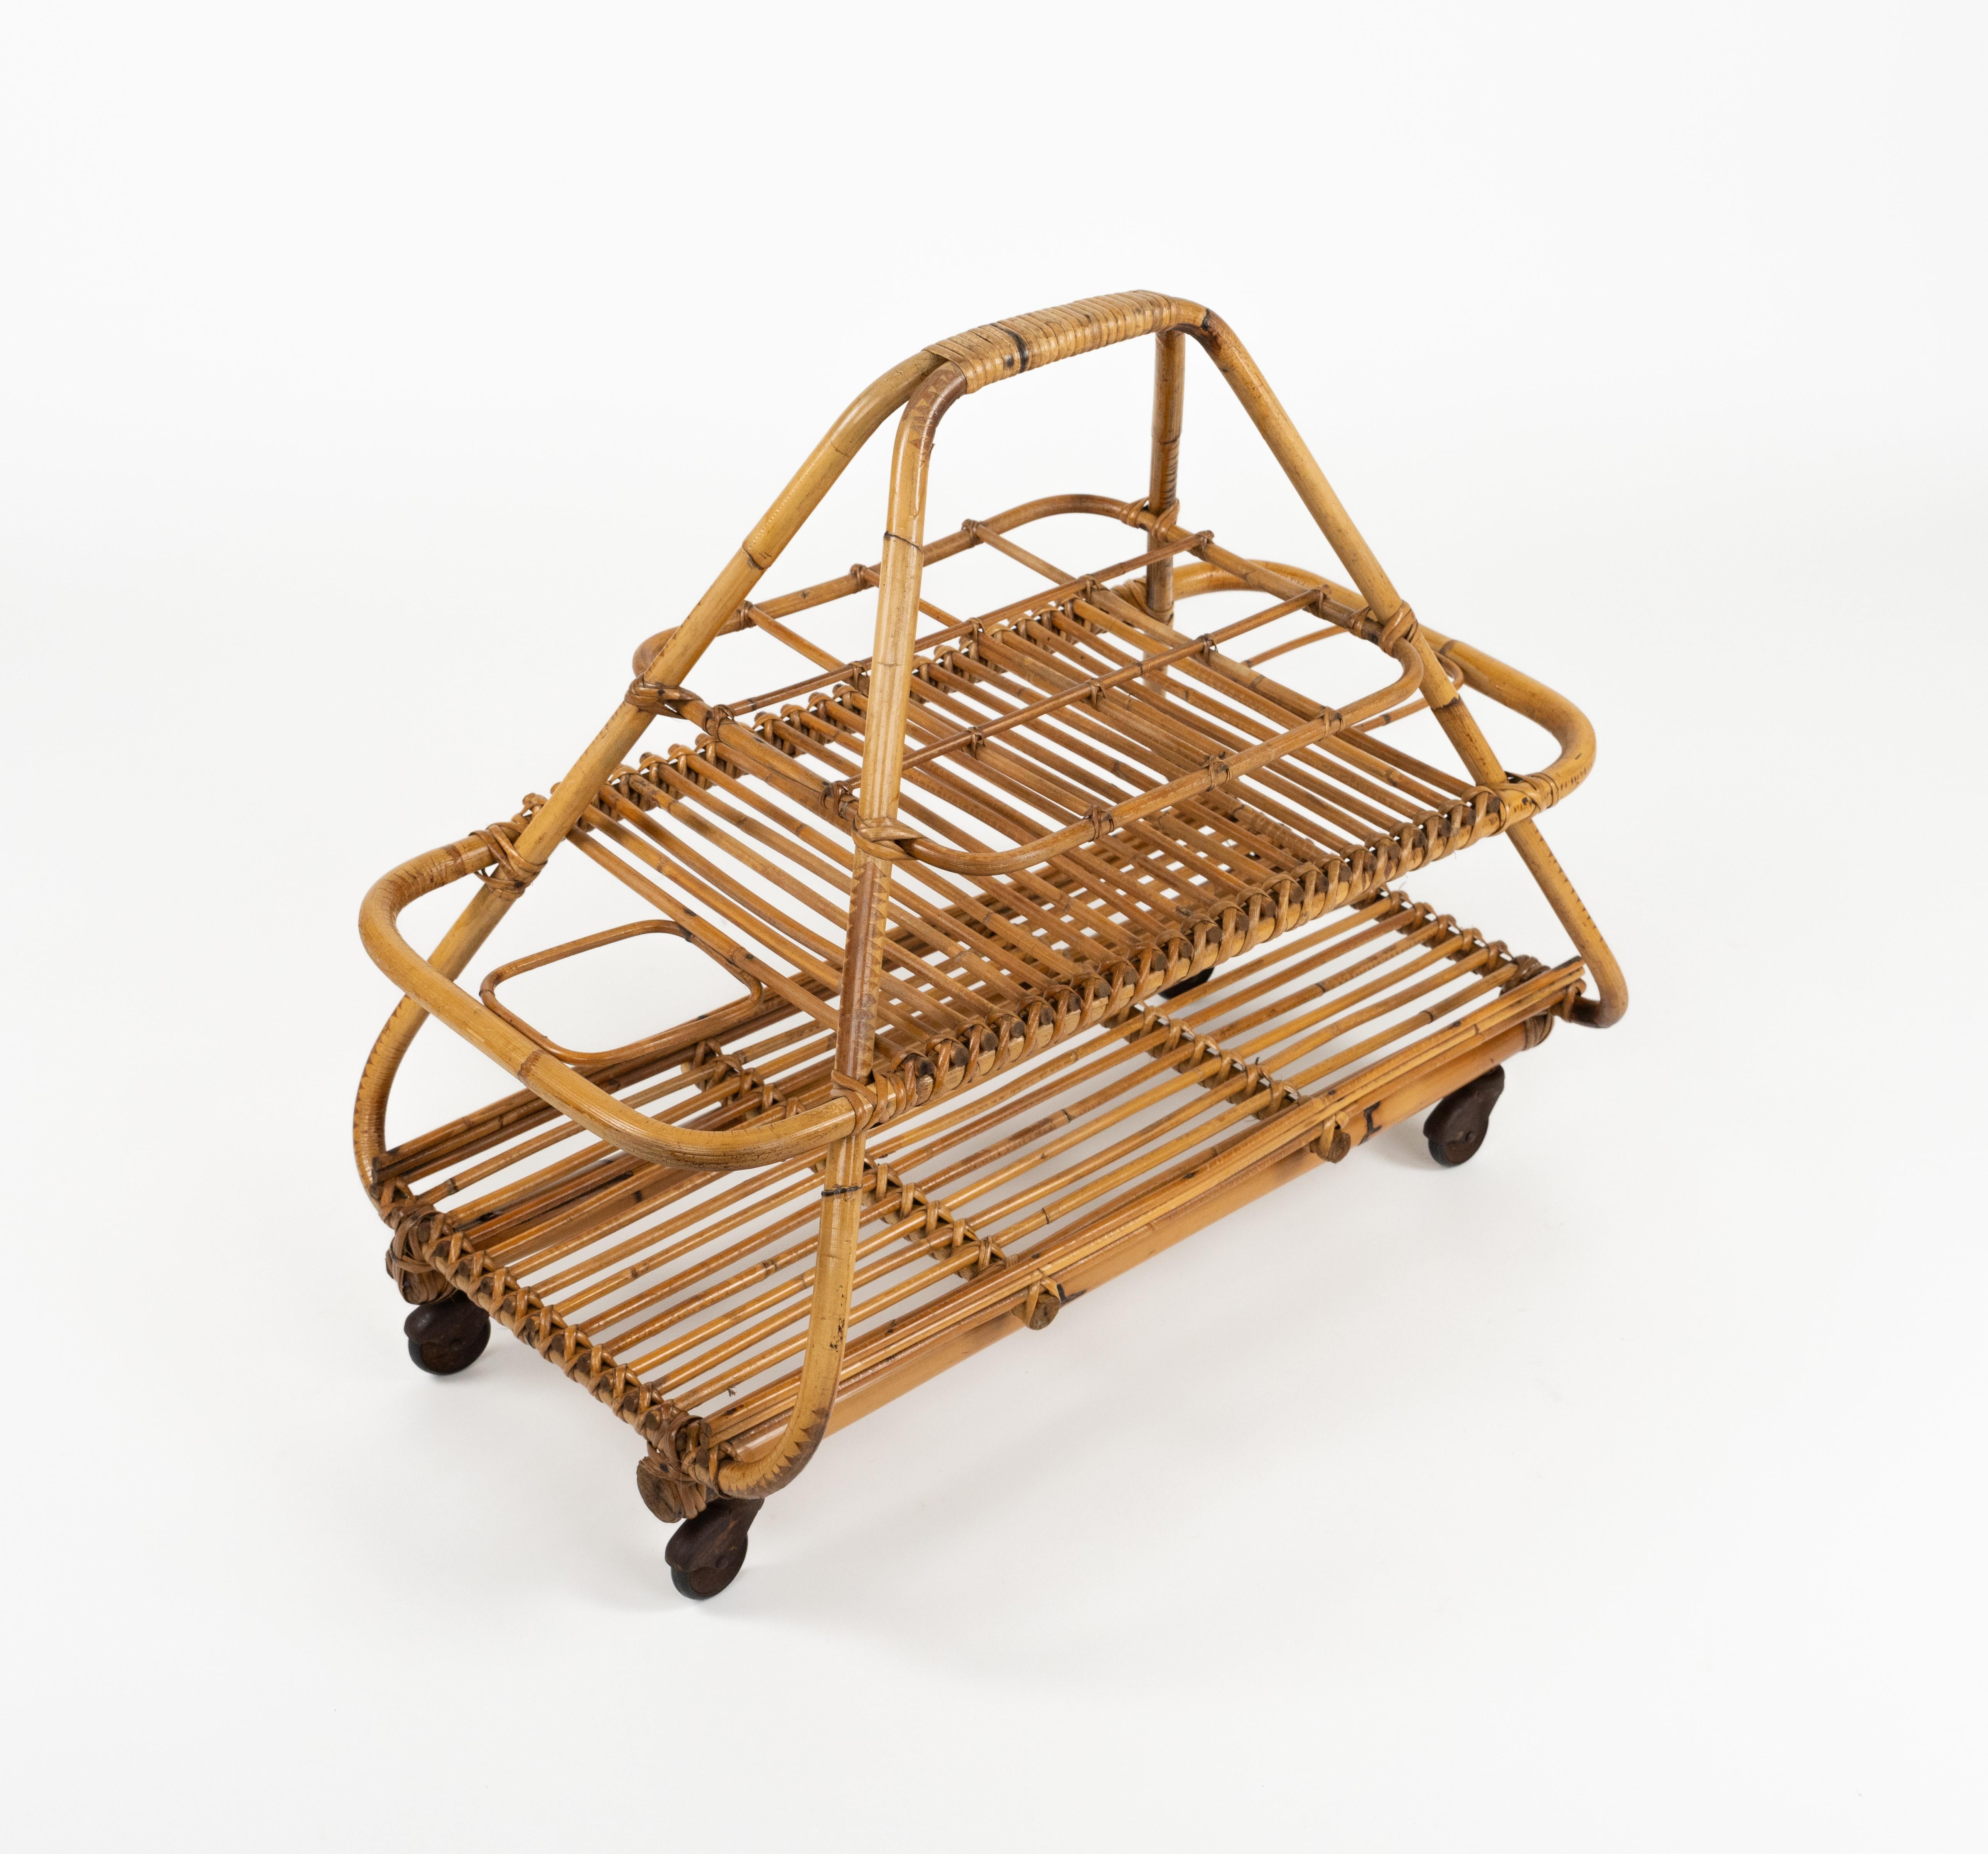 Italian Midcentury Serving Bar Cart with bottle holder in Rattan and Bamboo, Italy 1960s For Sale